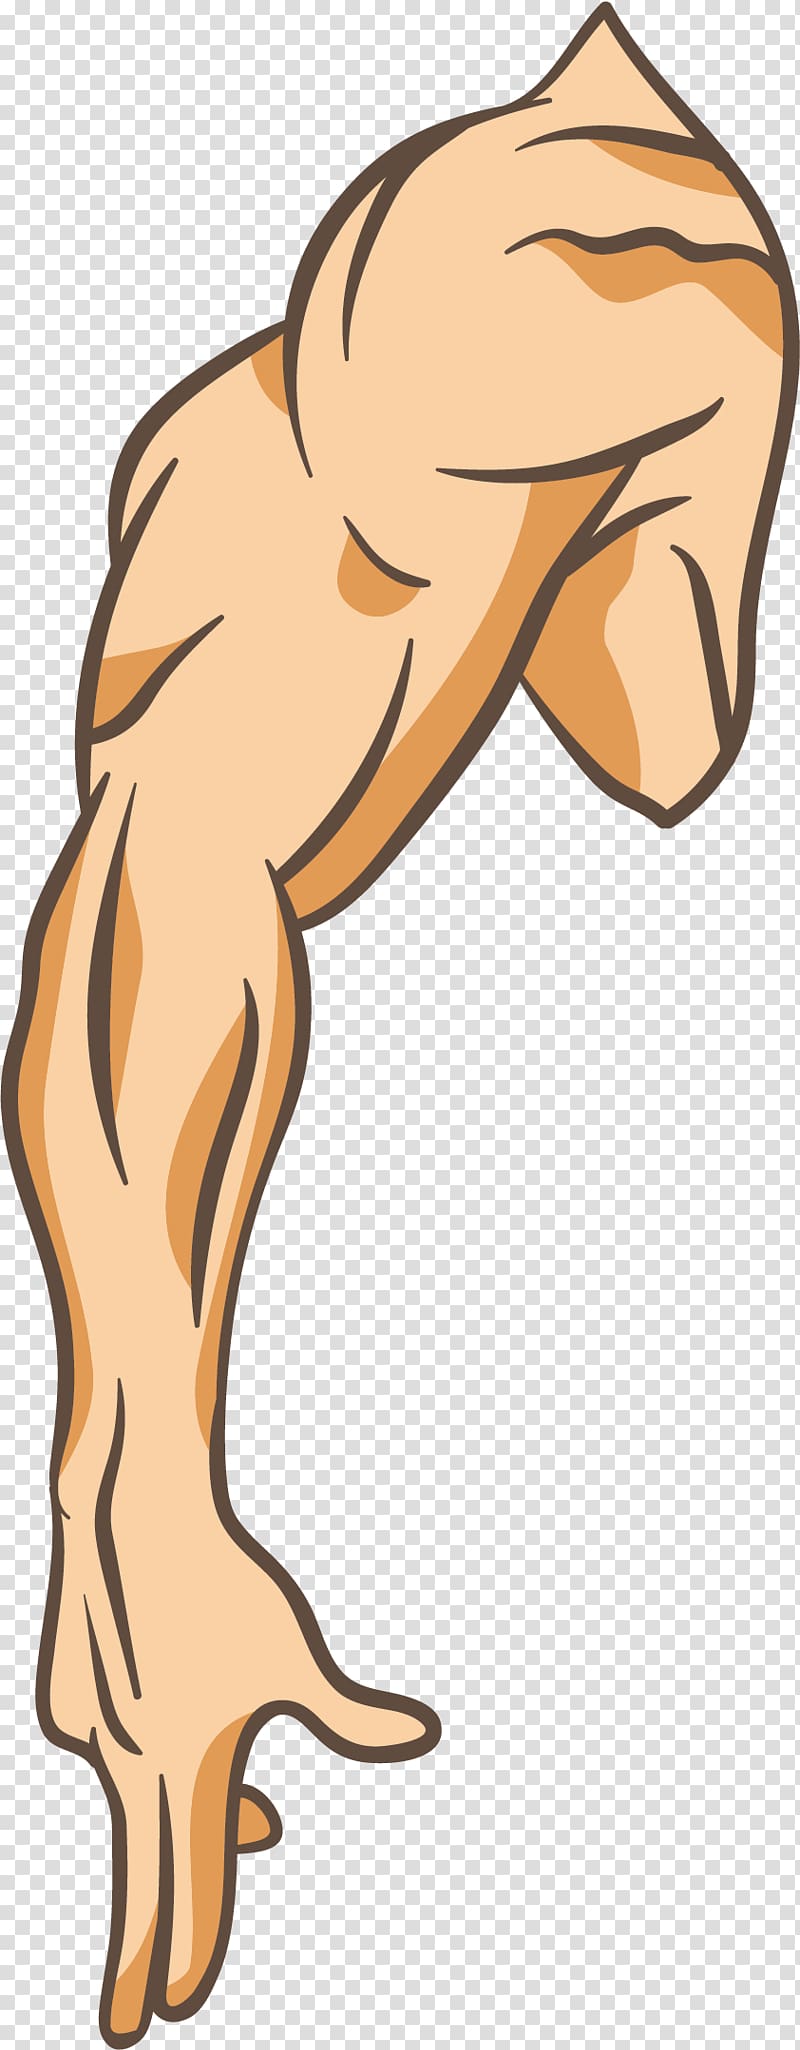 Computer file strong powerful. Arm clipart right arm